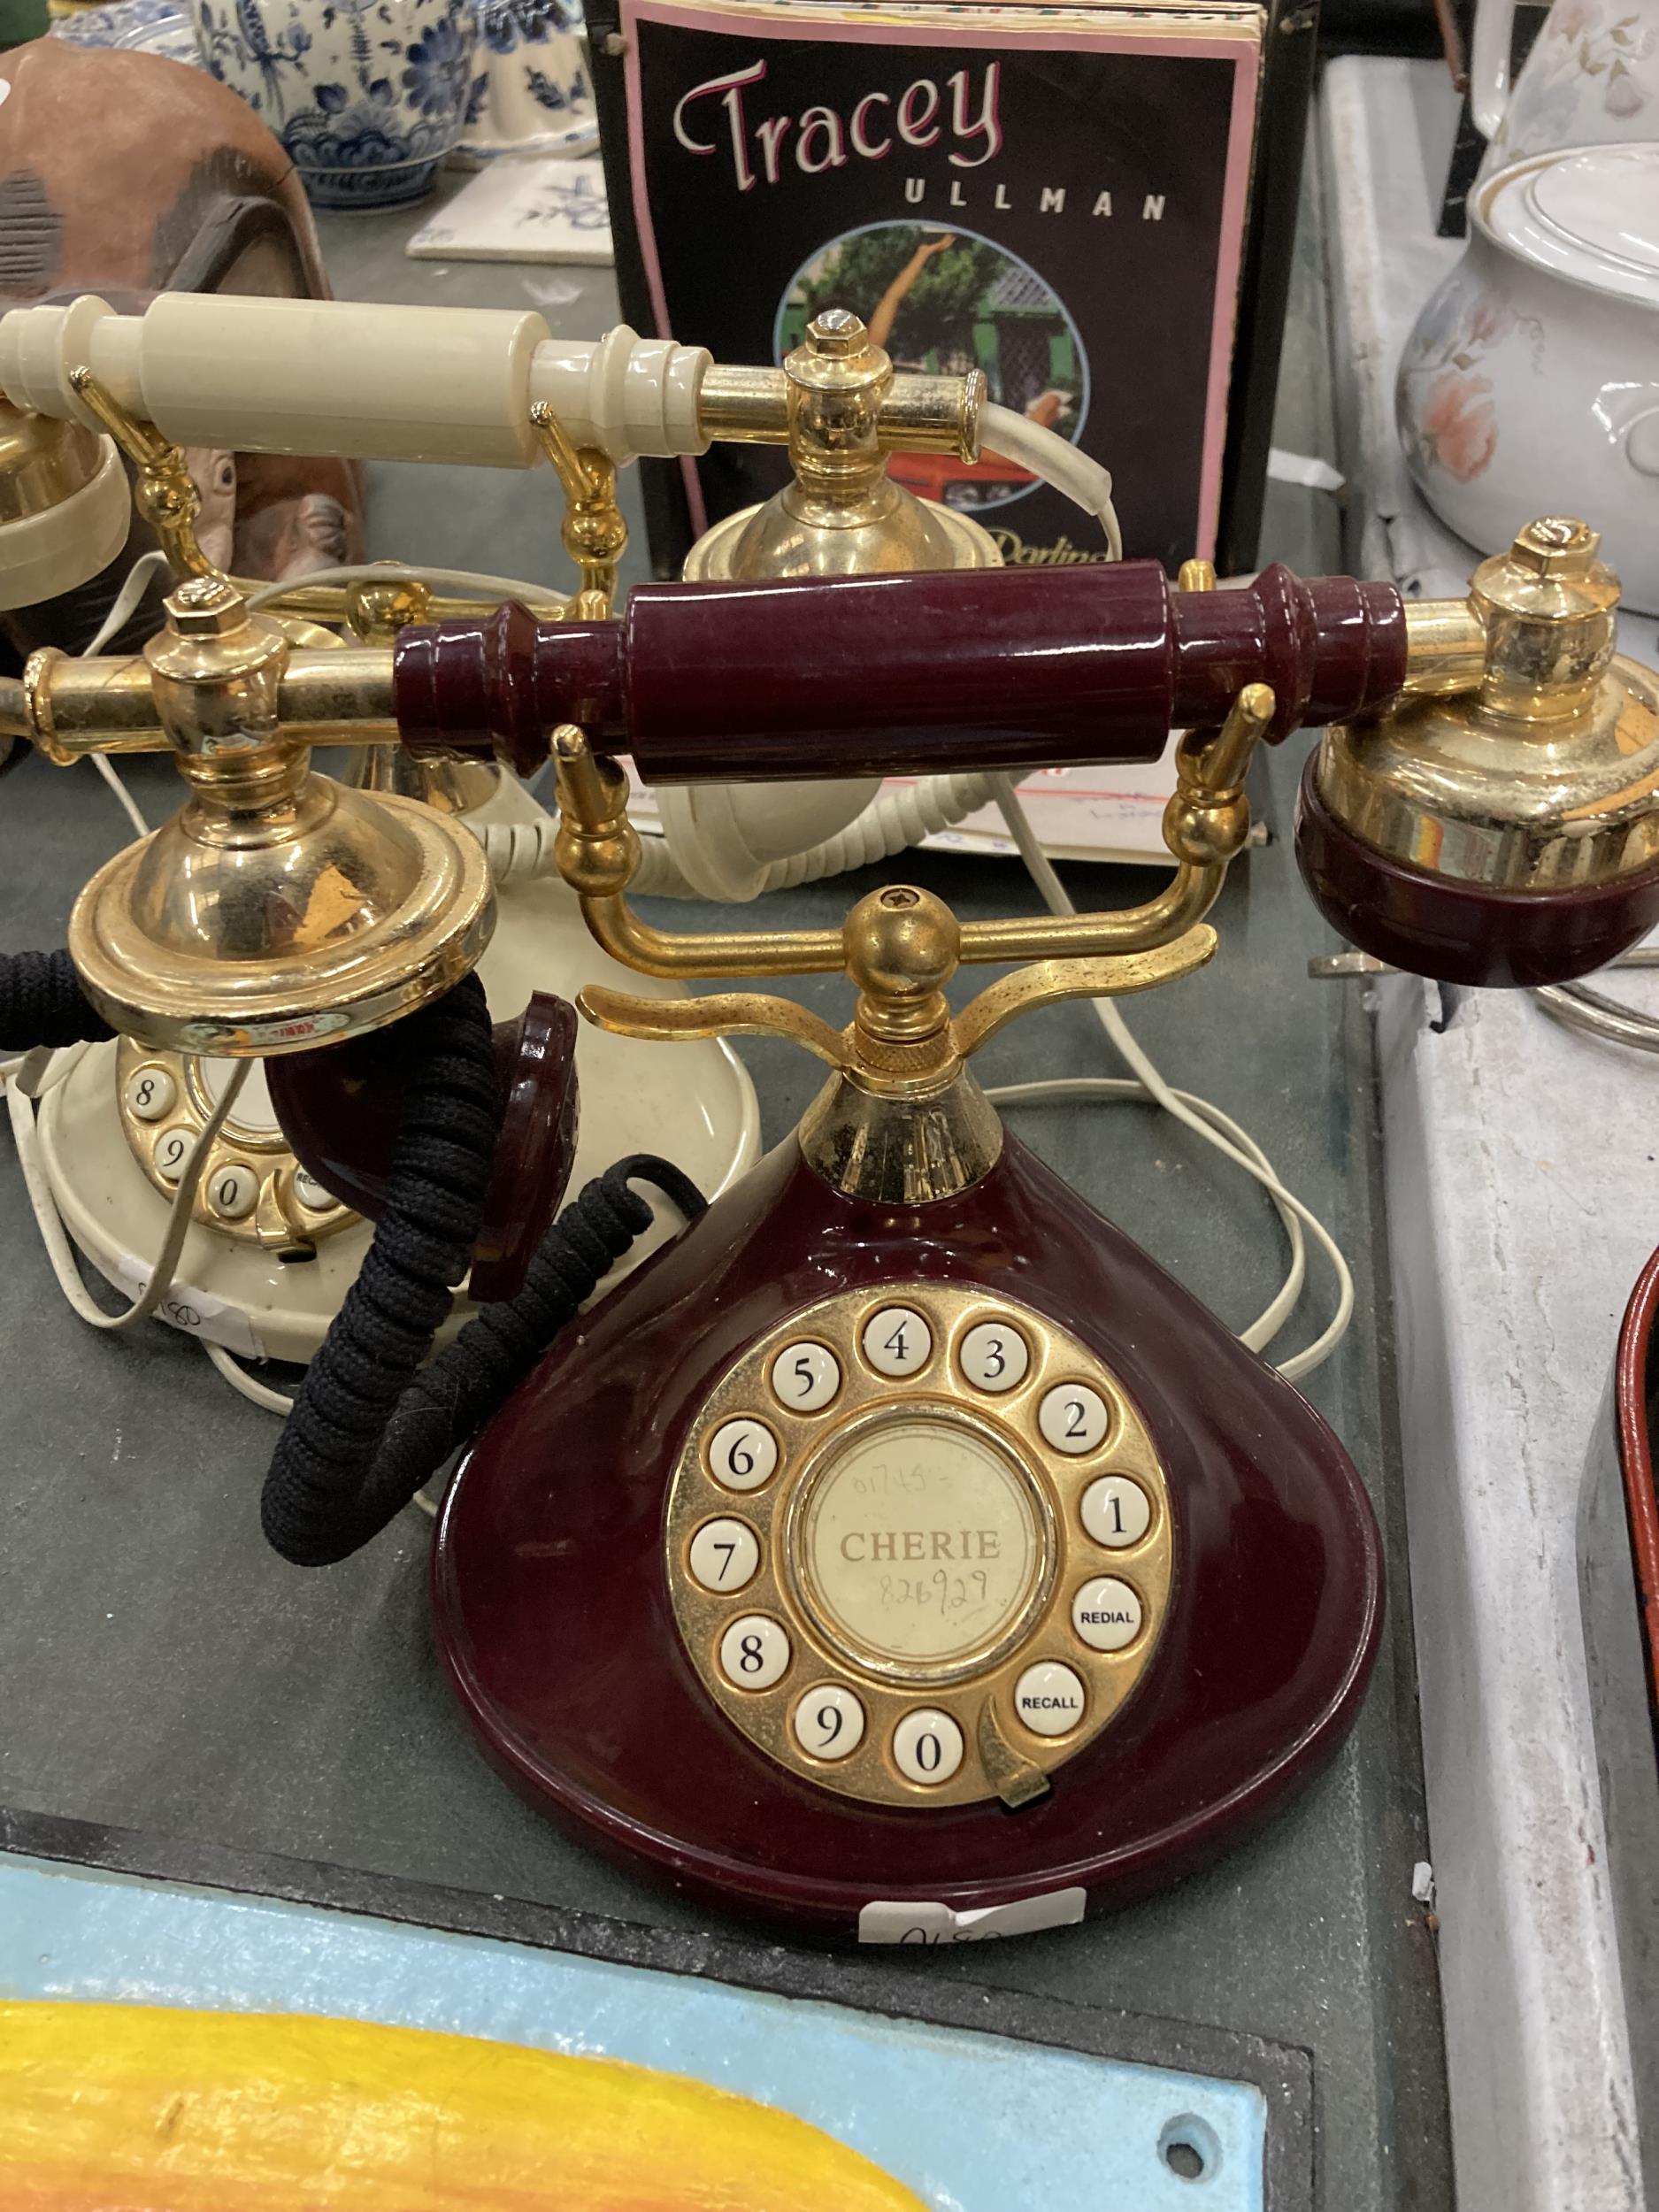 TWO RETRO DIAL UP TELEPHONES - Image 2 of 4